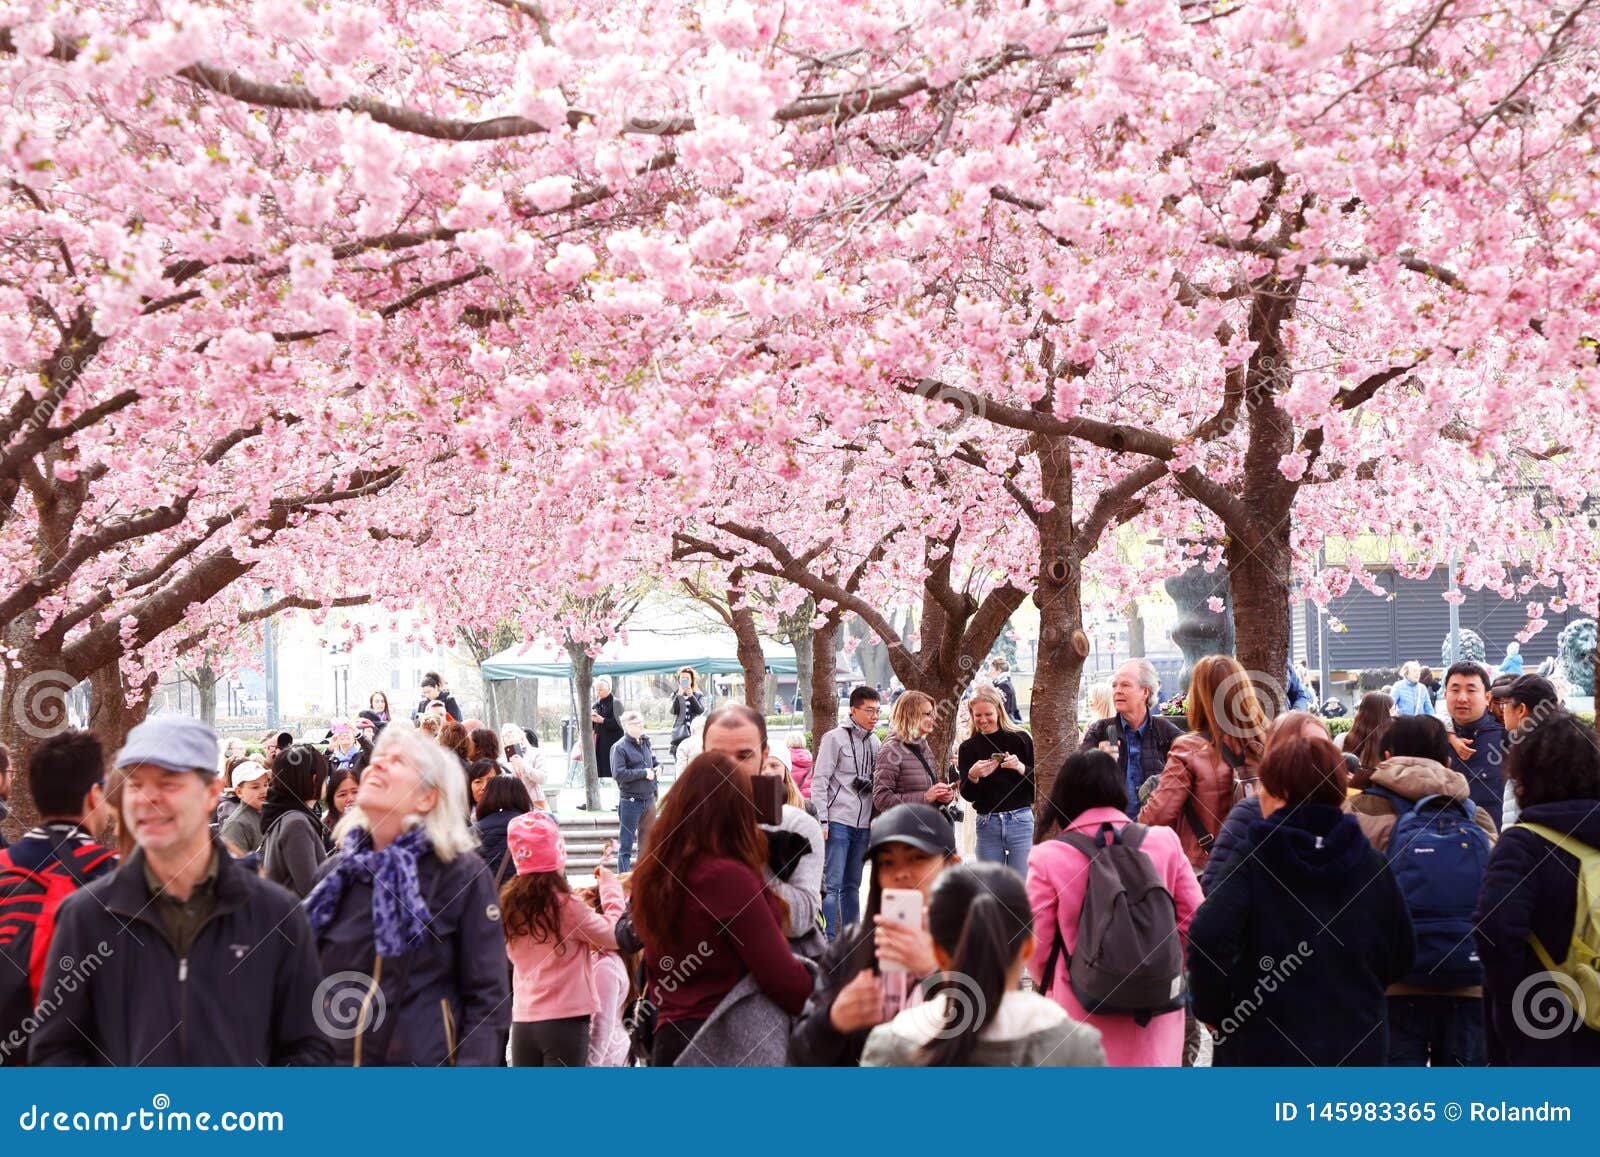 People Under Blooming Cherry Trees Editorial Image - Image of ...